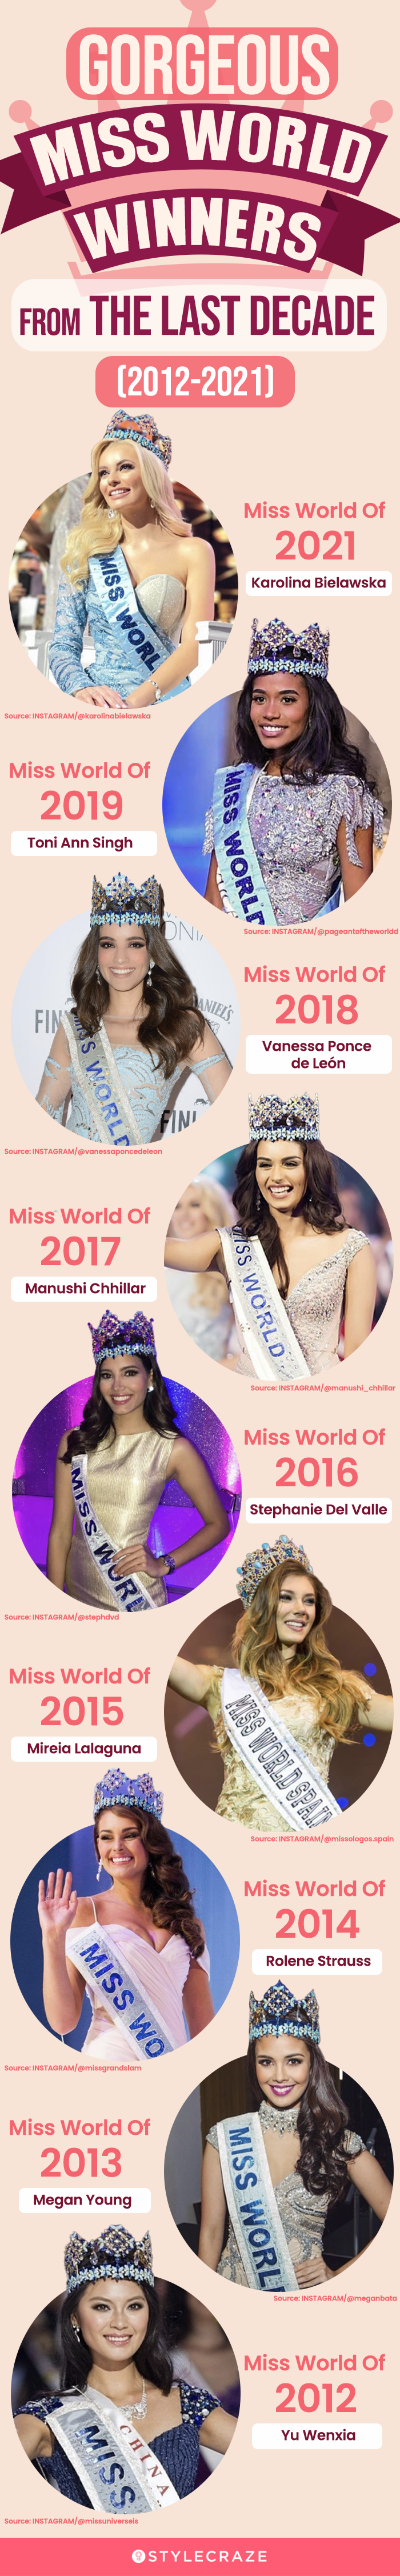 gorgeous miss world winners from the last decade (infographic)